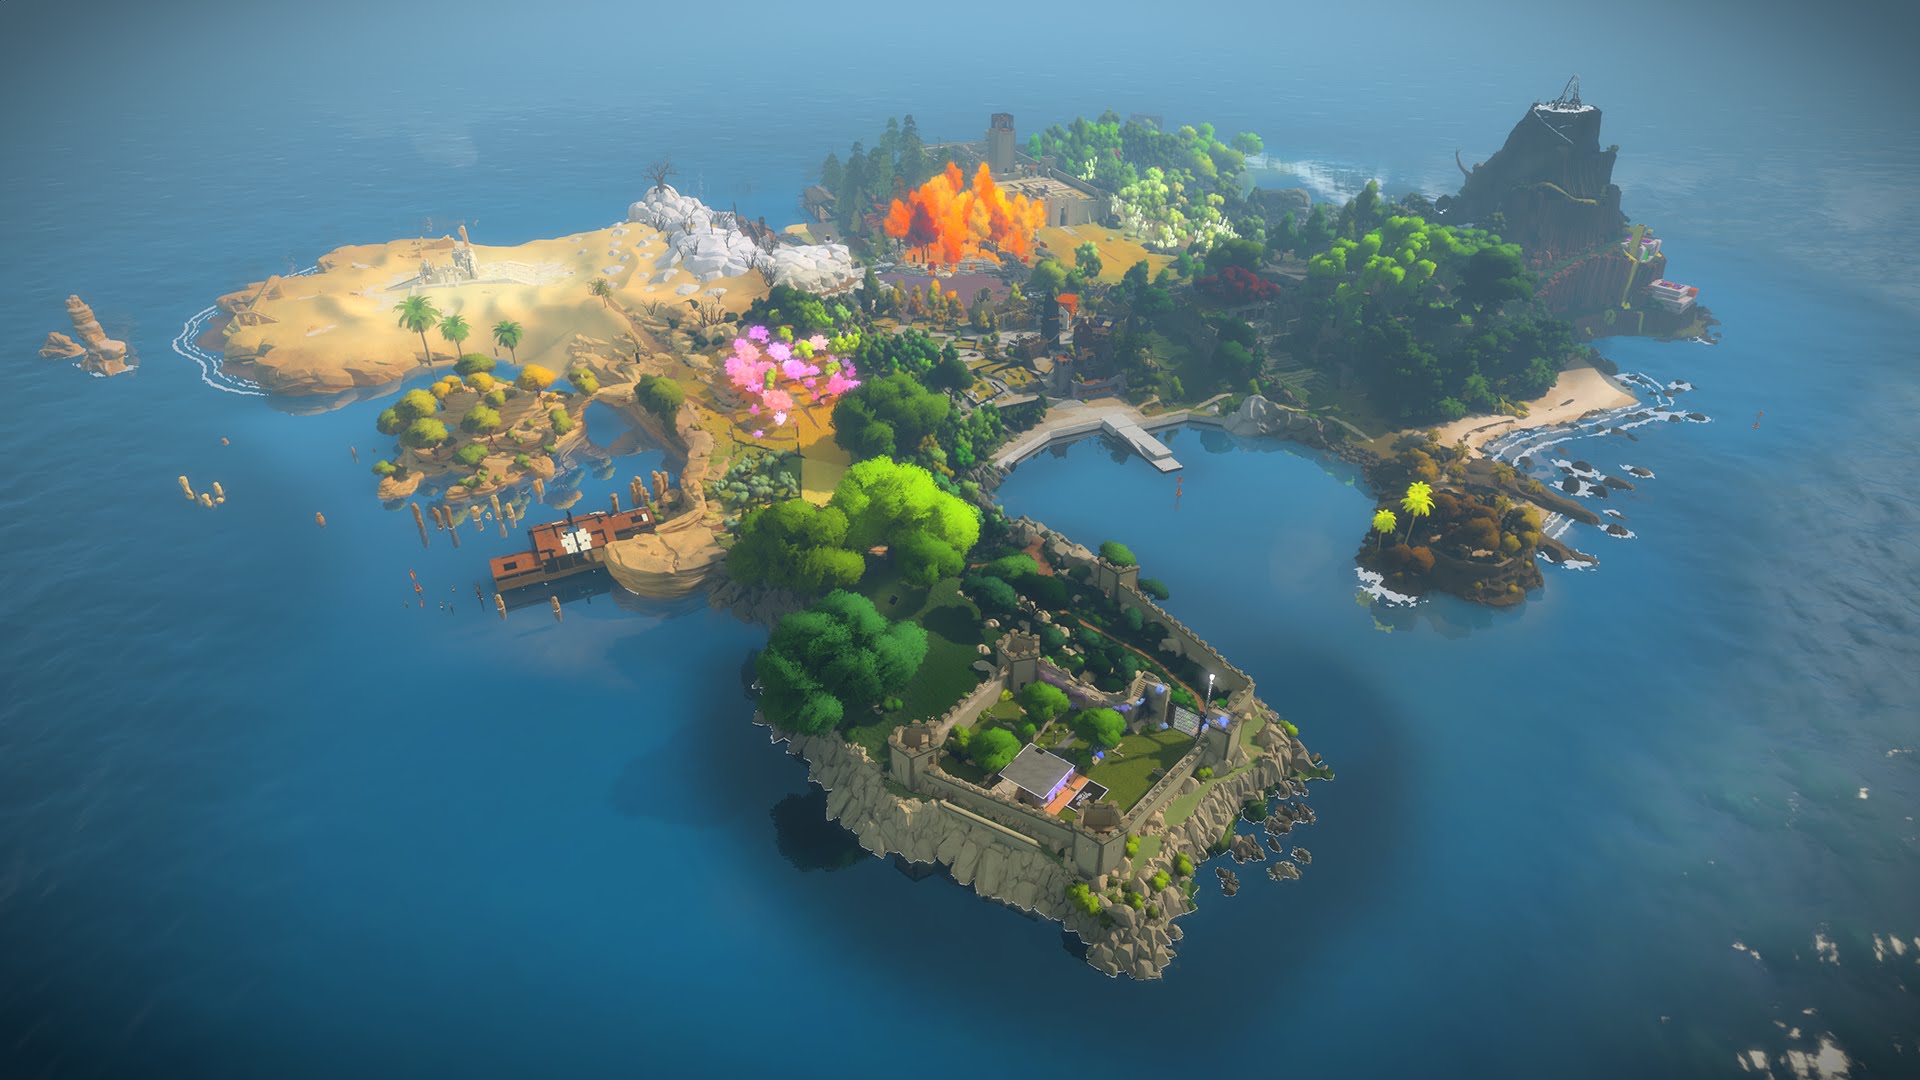 10. The Witness